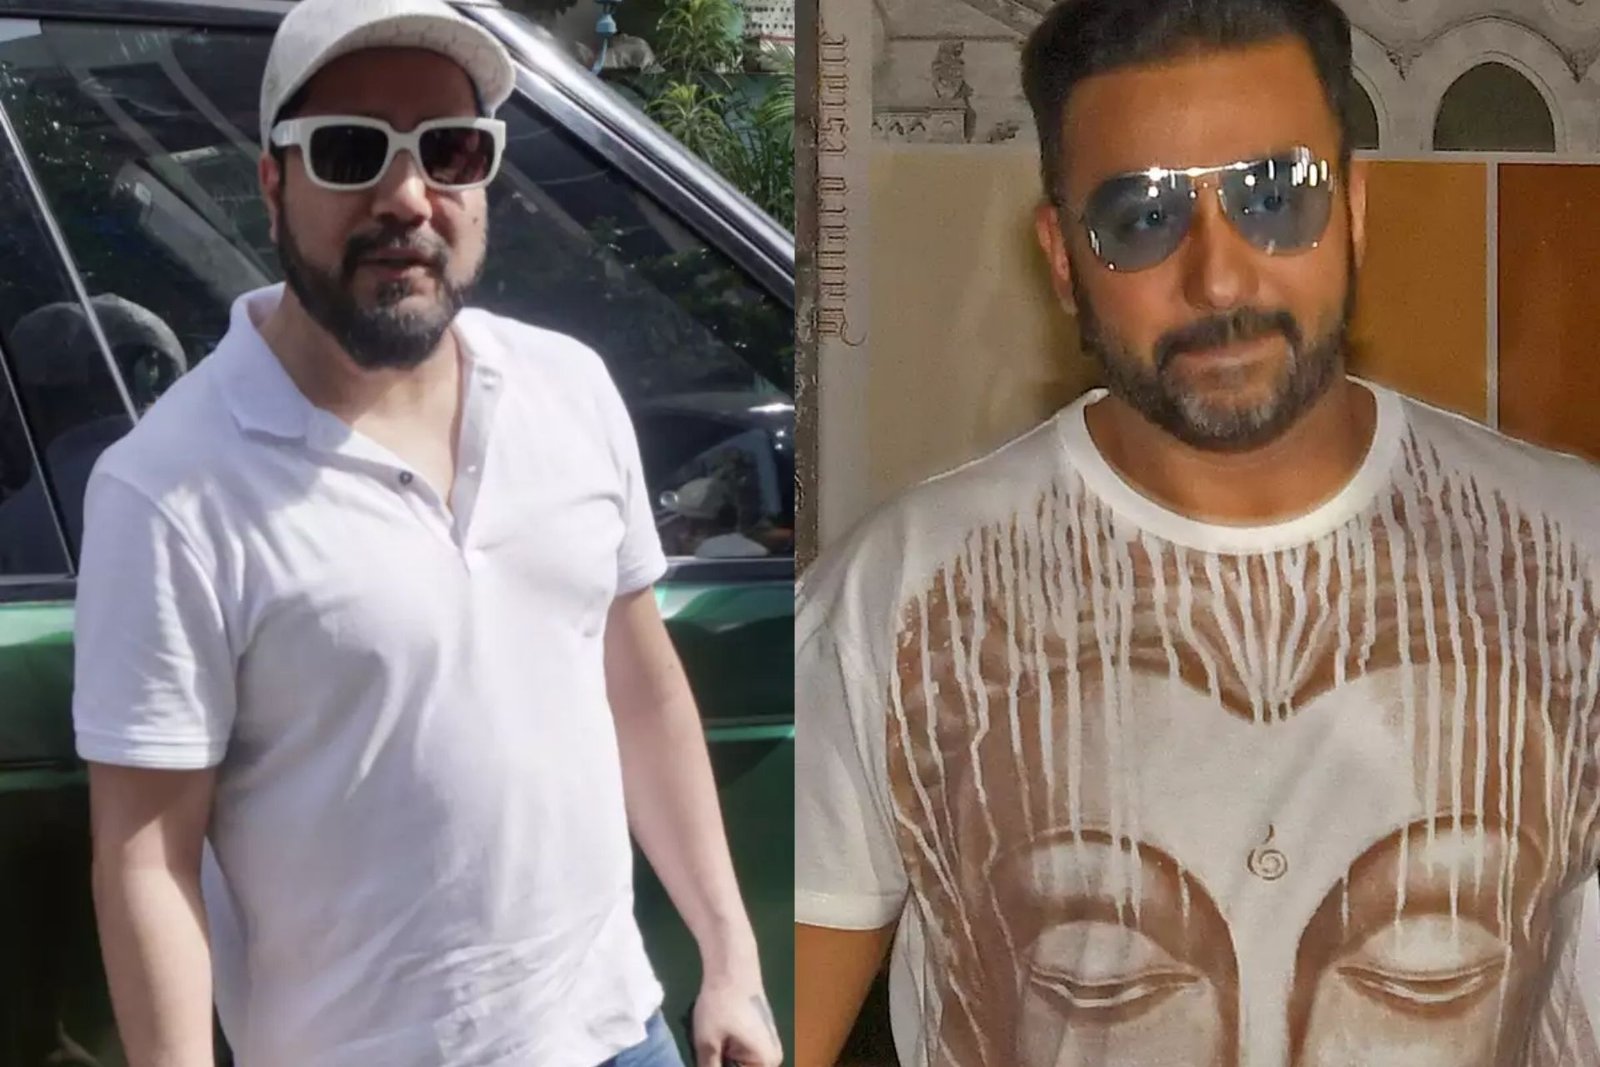 Police: Raj Kundra Sold App To Cover Up Pornographic Trail